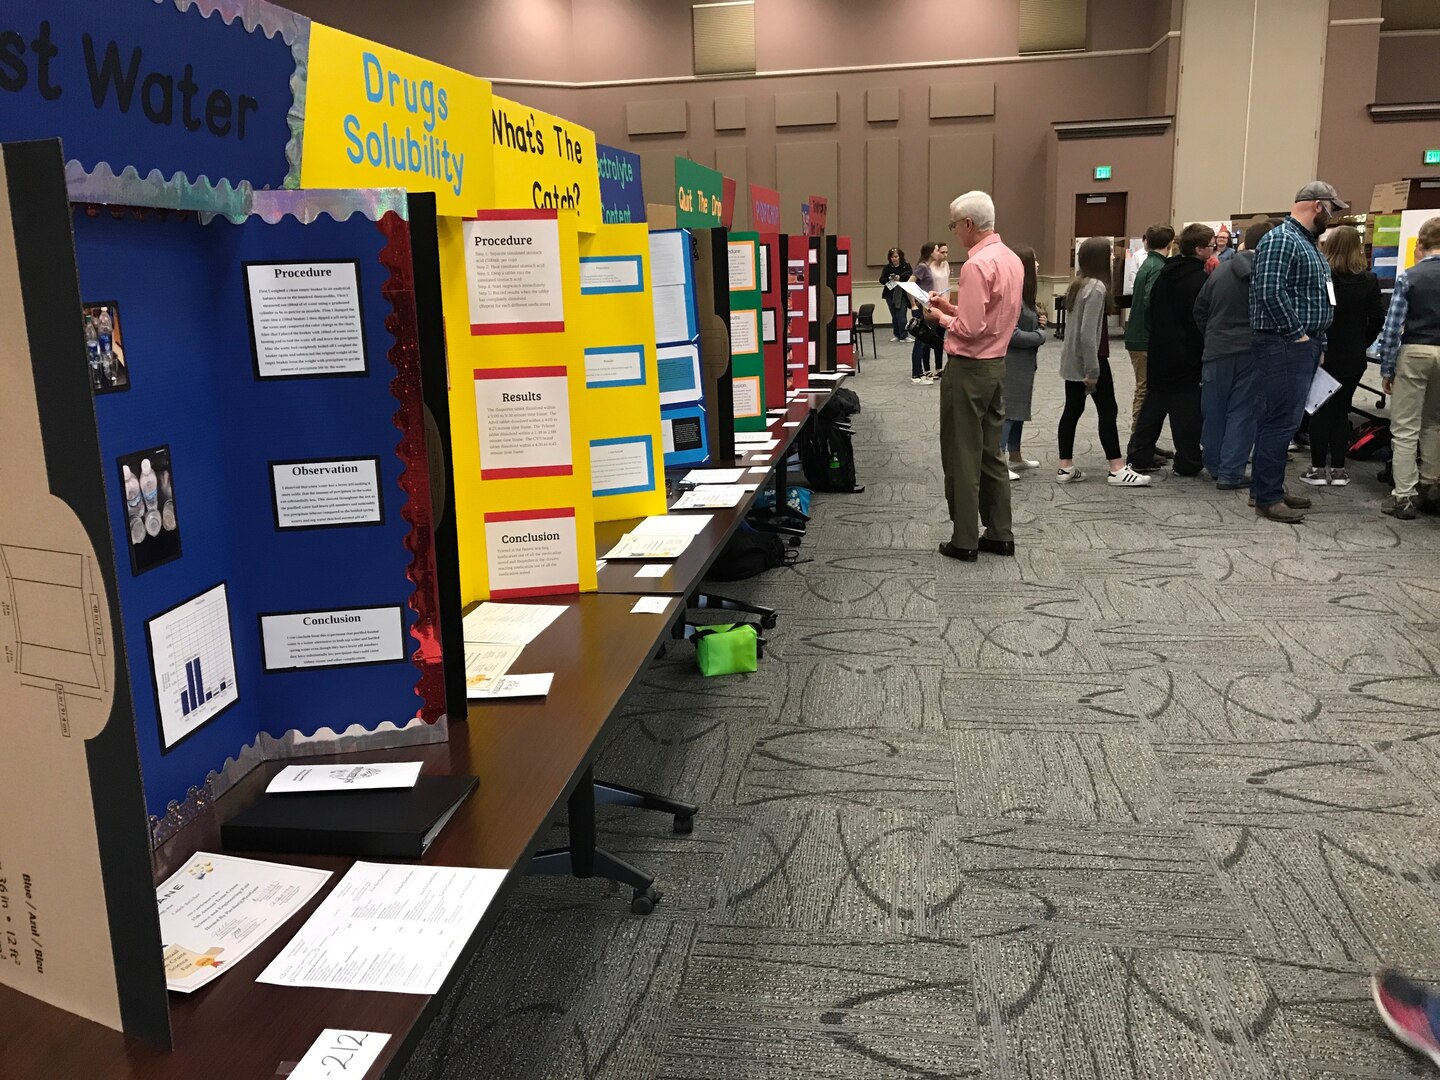 CRANE, Ind. – Naval Surface Warfare Center, Crane Division (NSWC Crane) Science, Technology, Engineering, and Math (STEM) Department hosted a youth science fair at WestGate Academy on April 4, 2019.